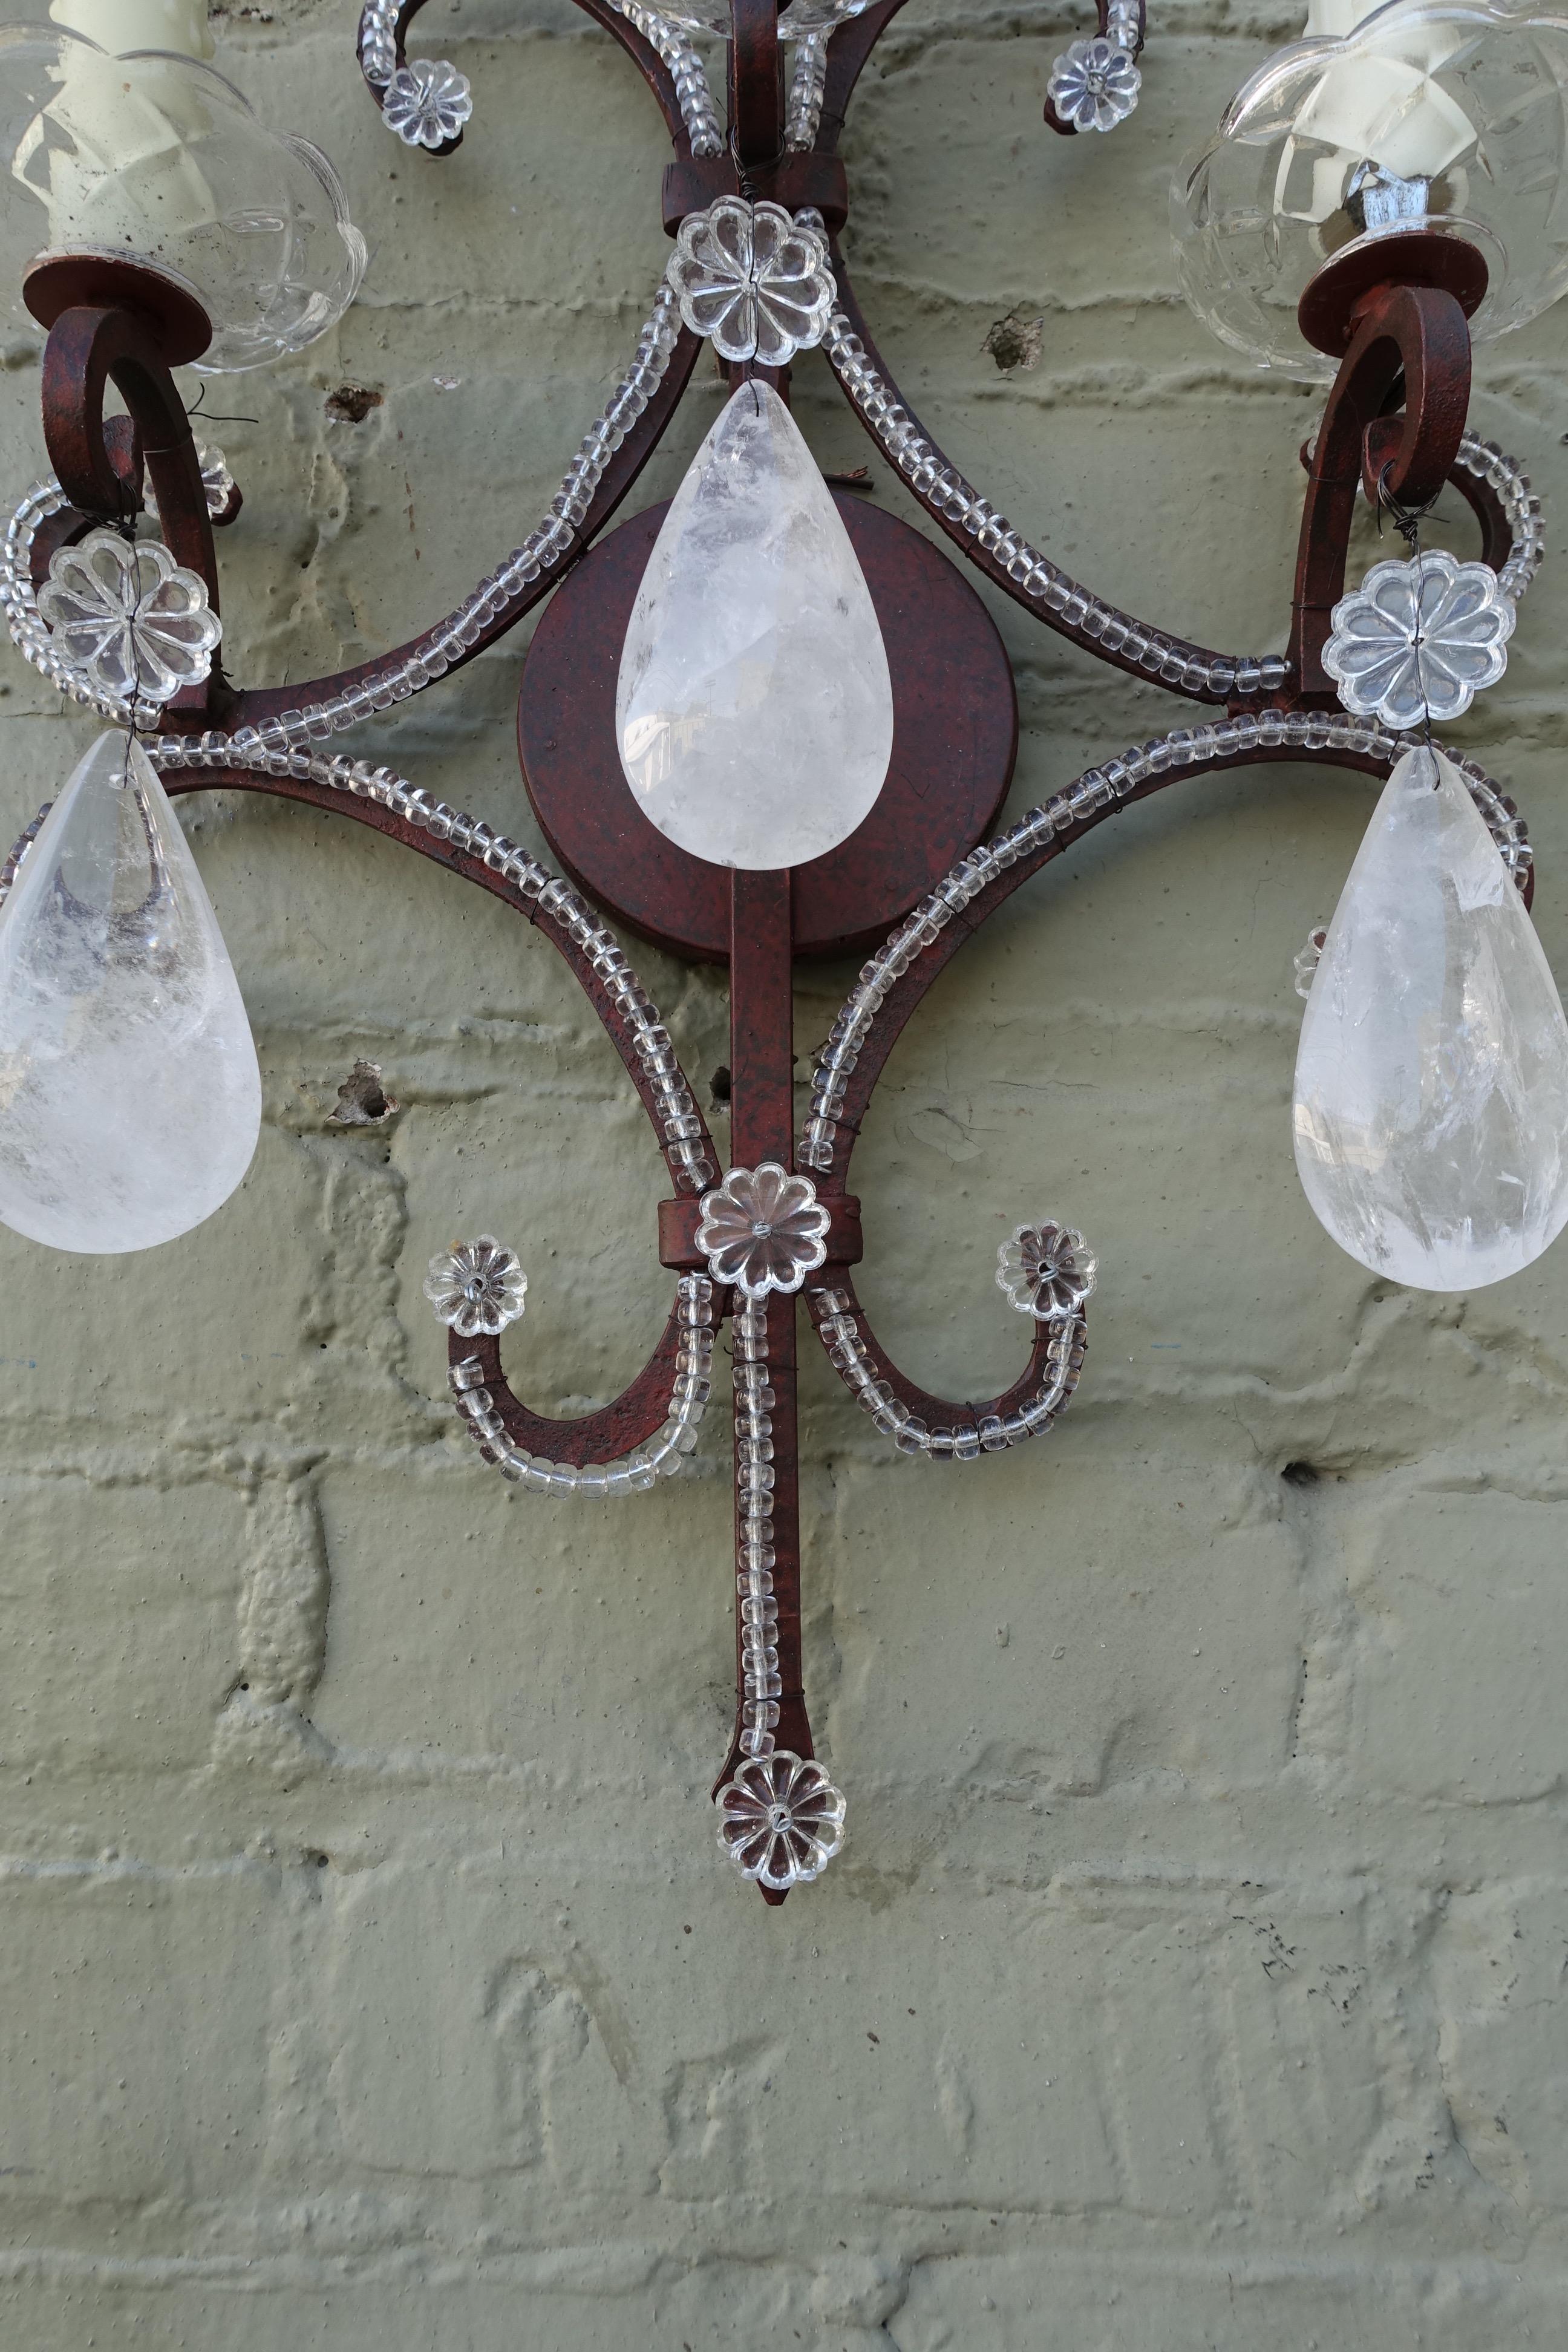 Pair of three-light wrought iron beaded sconces with almond shaped rock crystals. The sconces are newly rewired with drip wax candle covers. Newly rewired and ready to install.